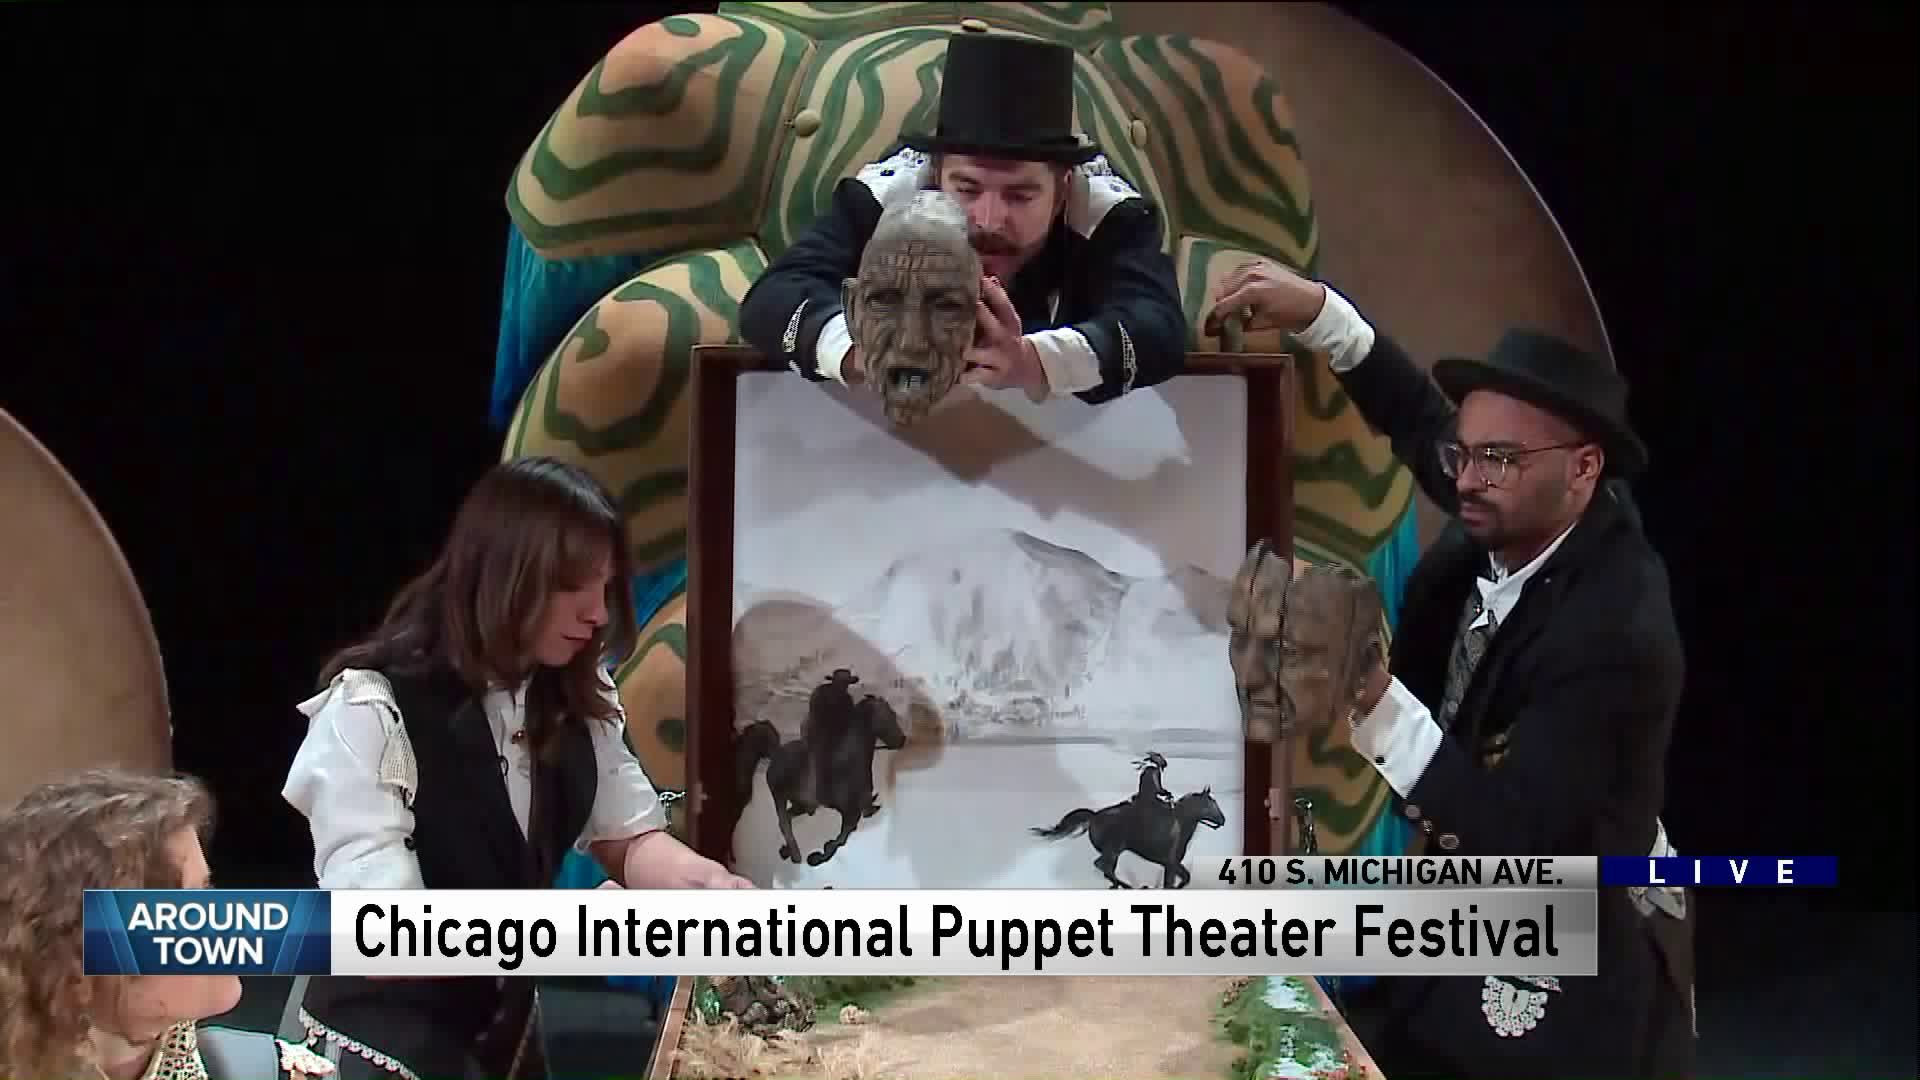 Around Town checks out the Chicago International Puppet Theater Festival